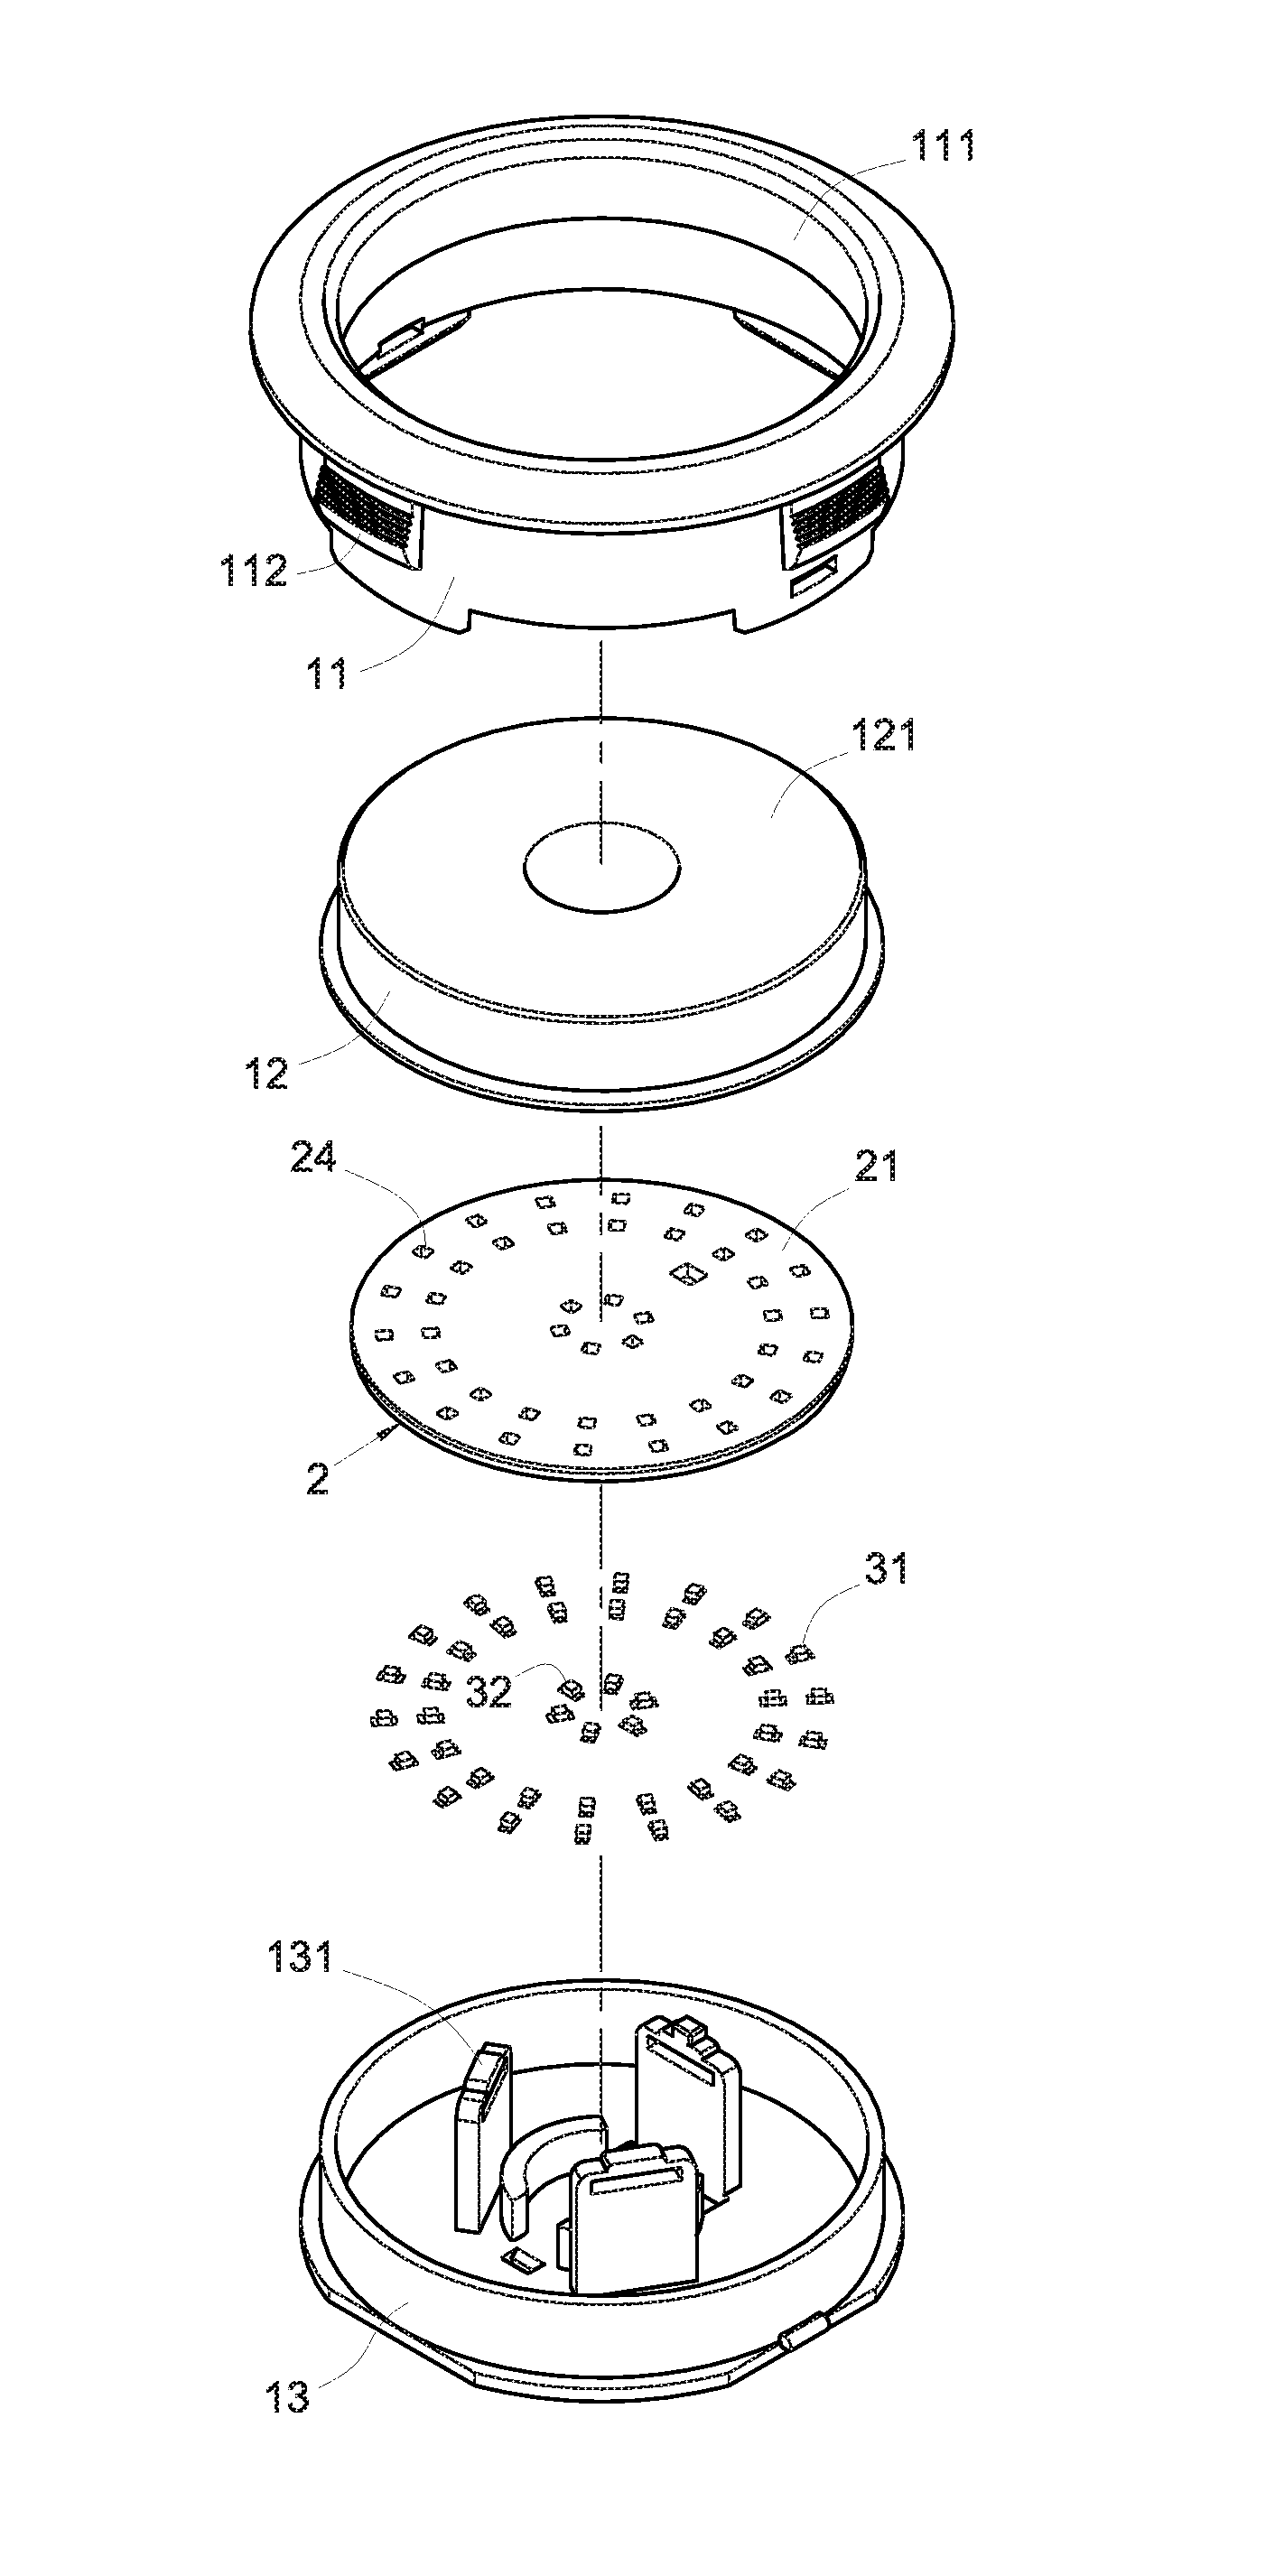 Touch-sensitive rotary switch